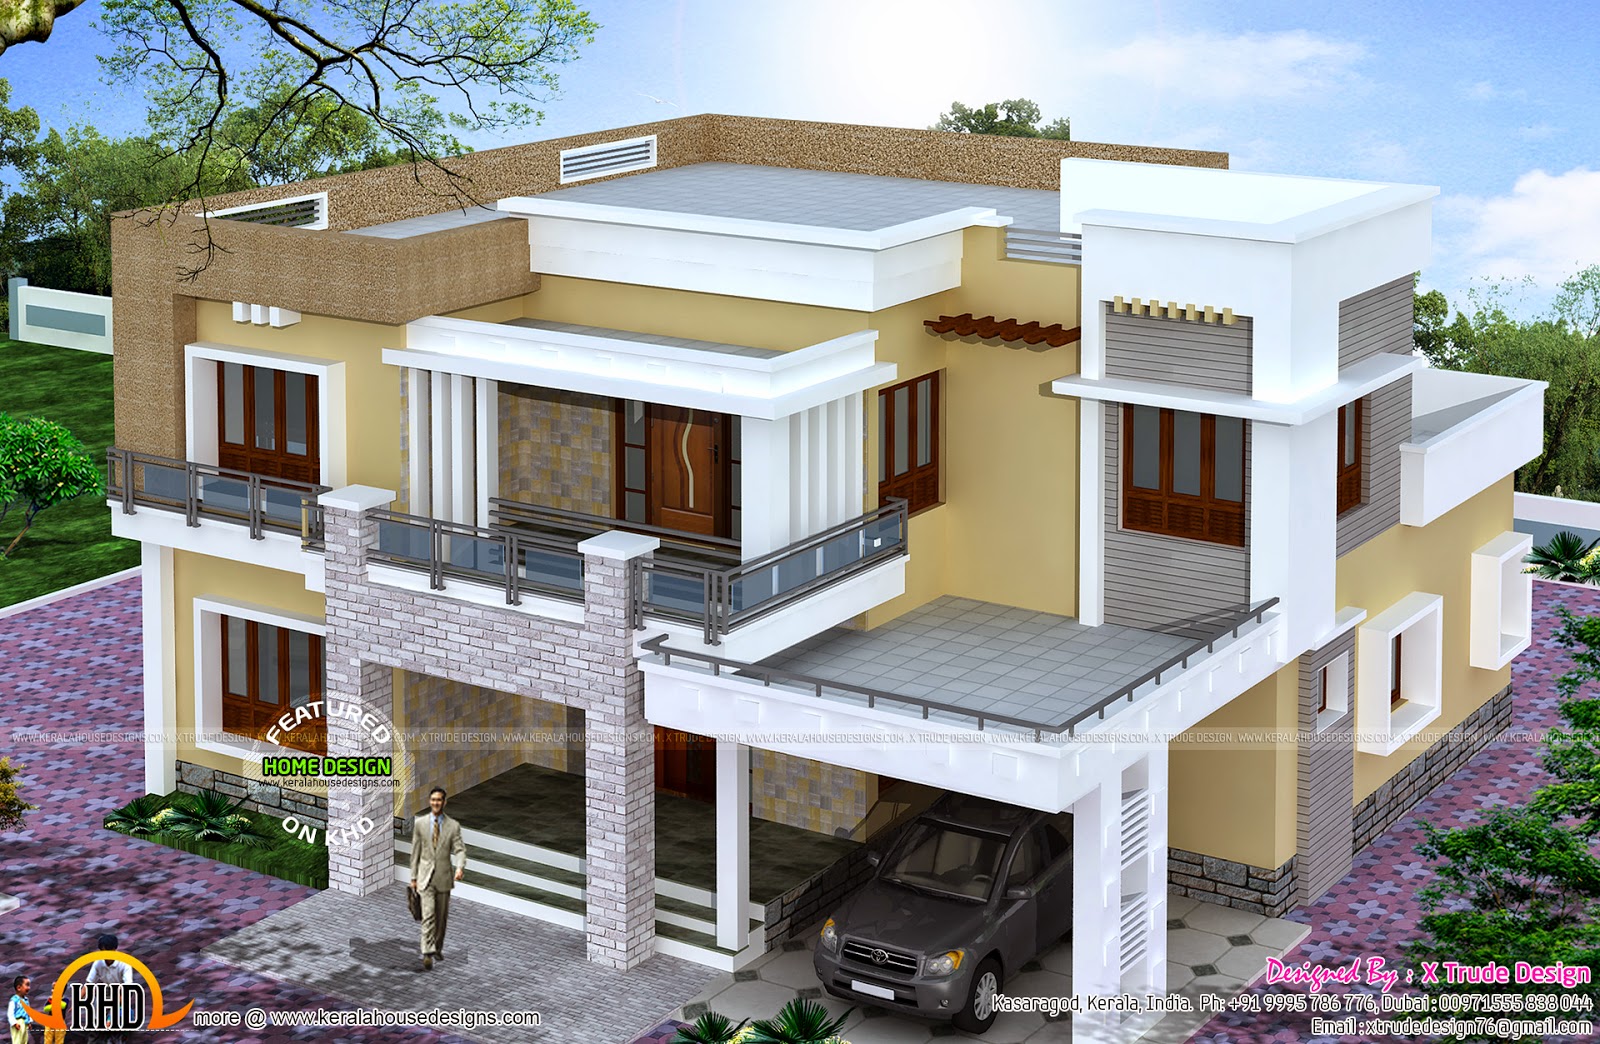 Different views  of 2800 sq ft modern  home  Kerala home  